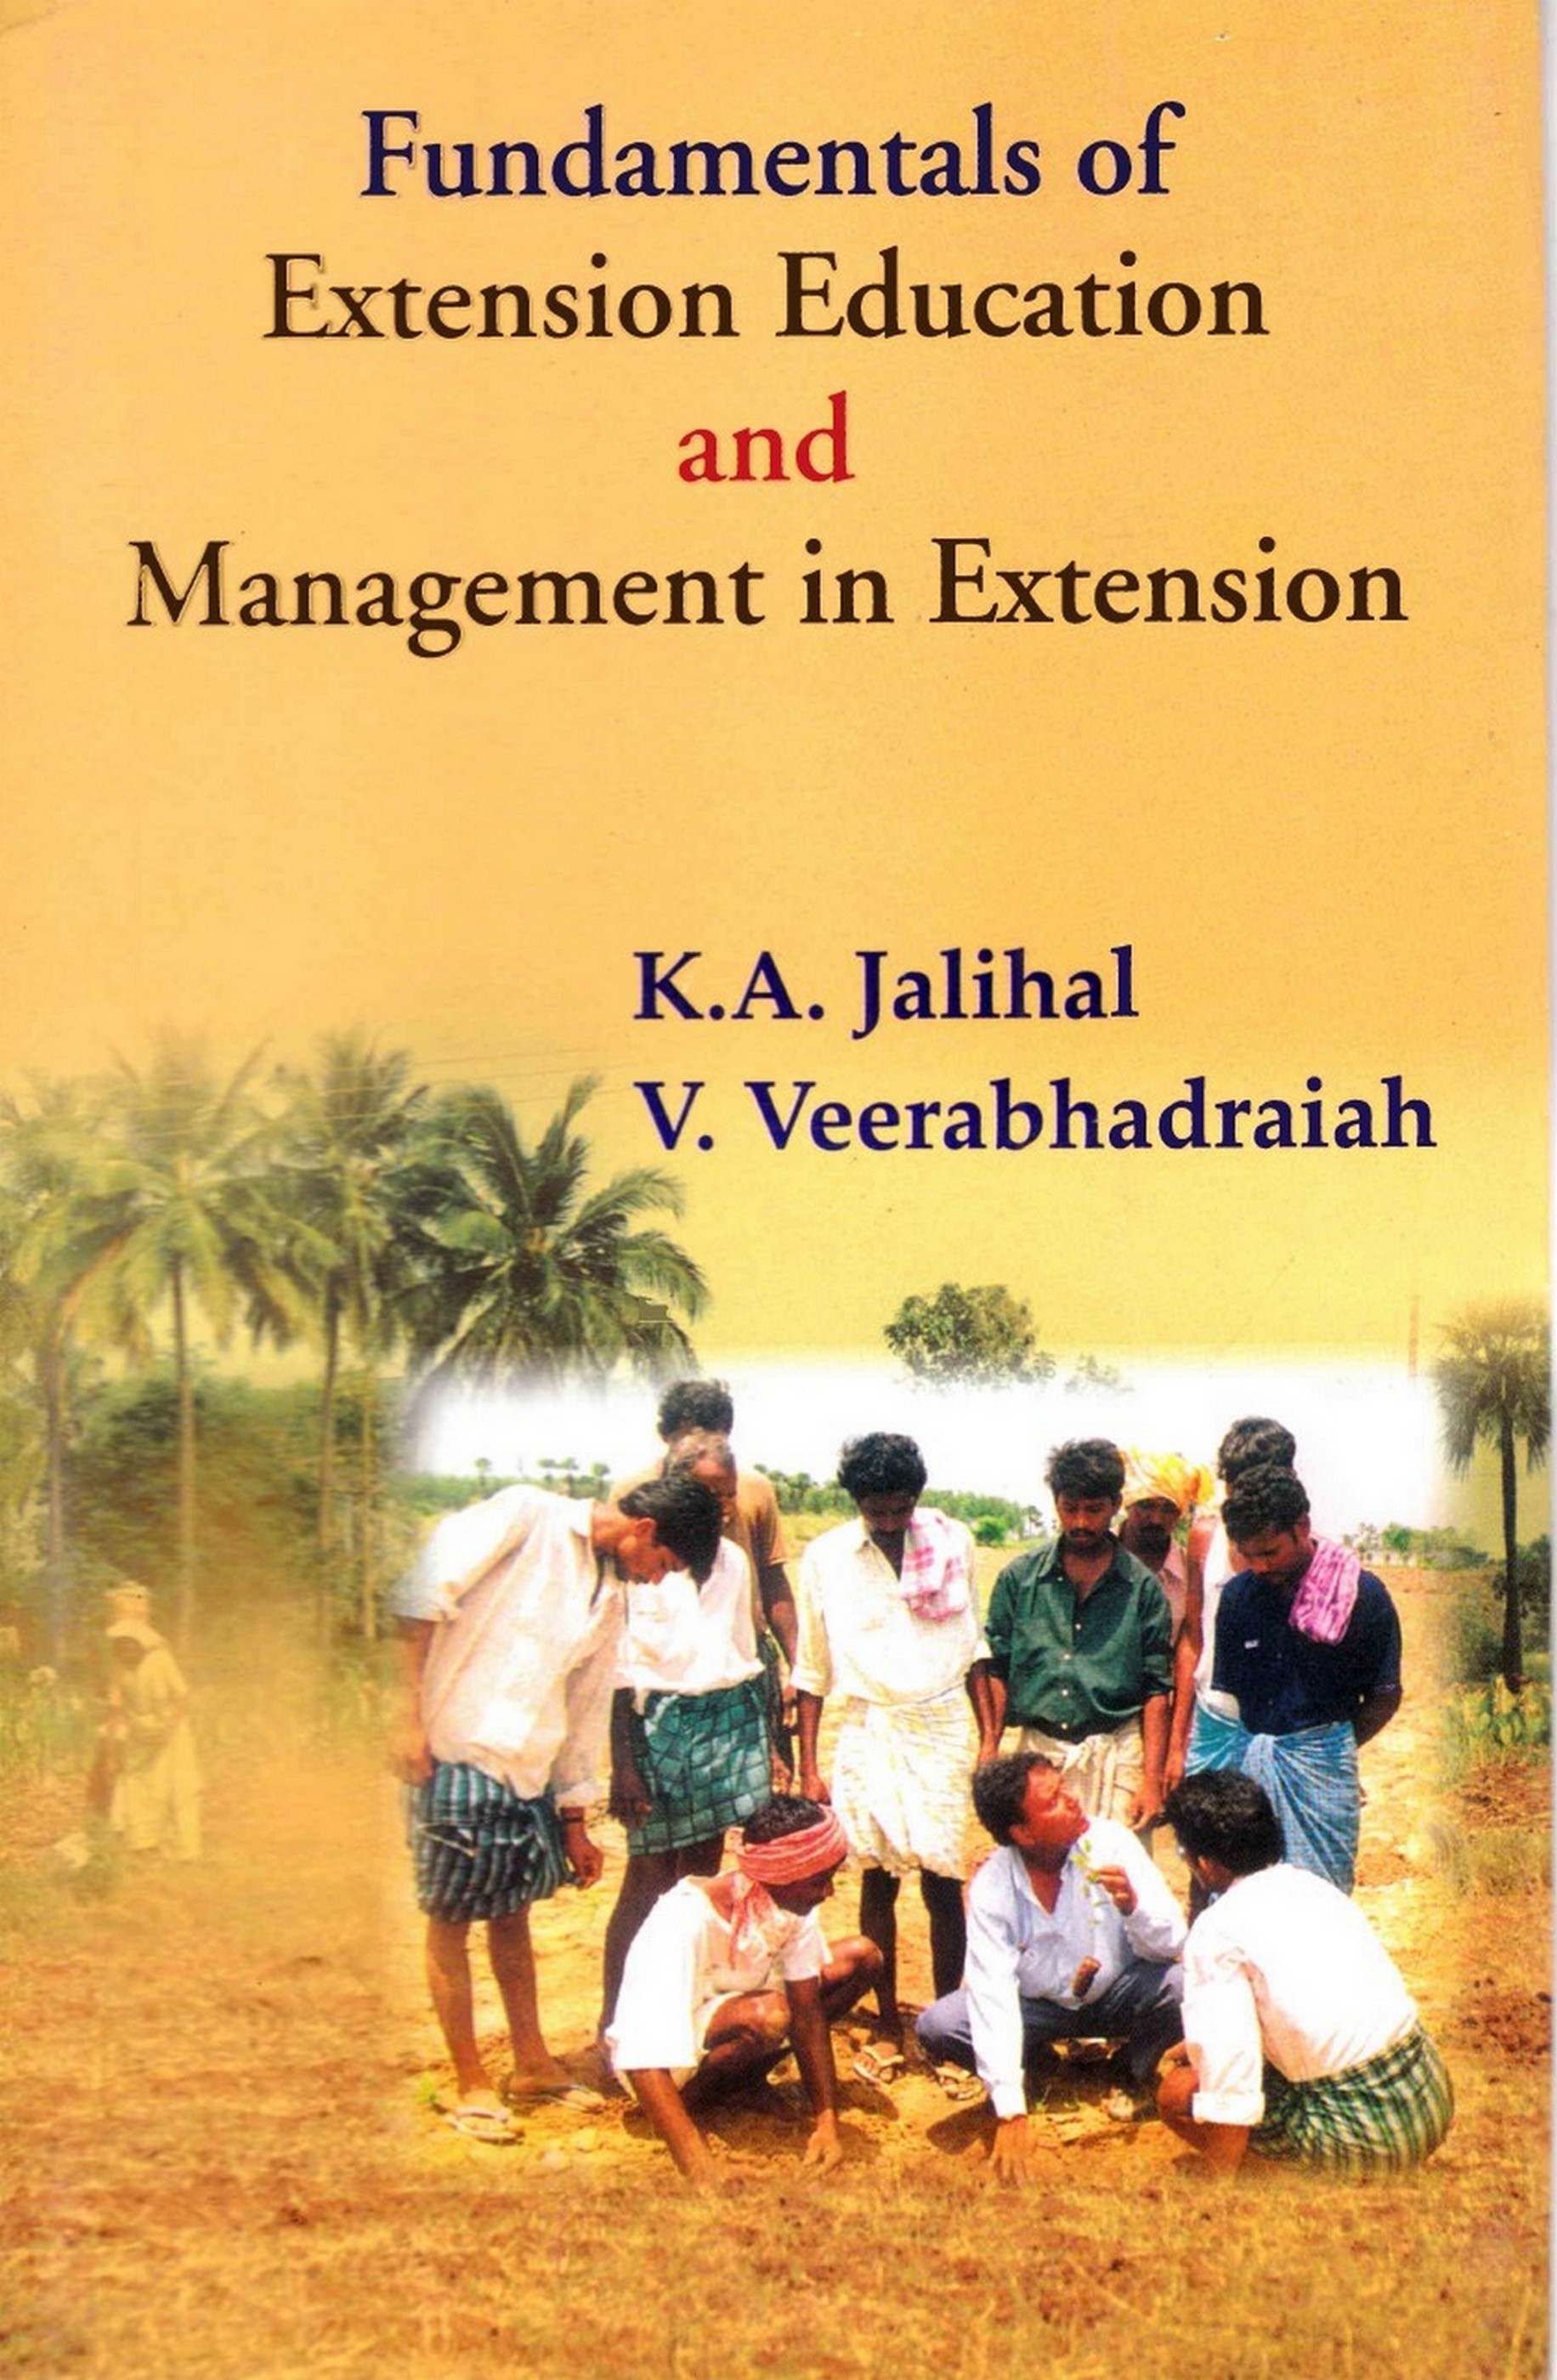 Fundamentals of Extension Education and Management in Extension